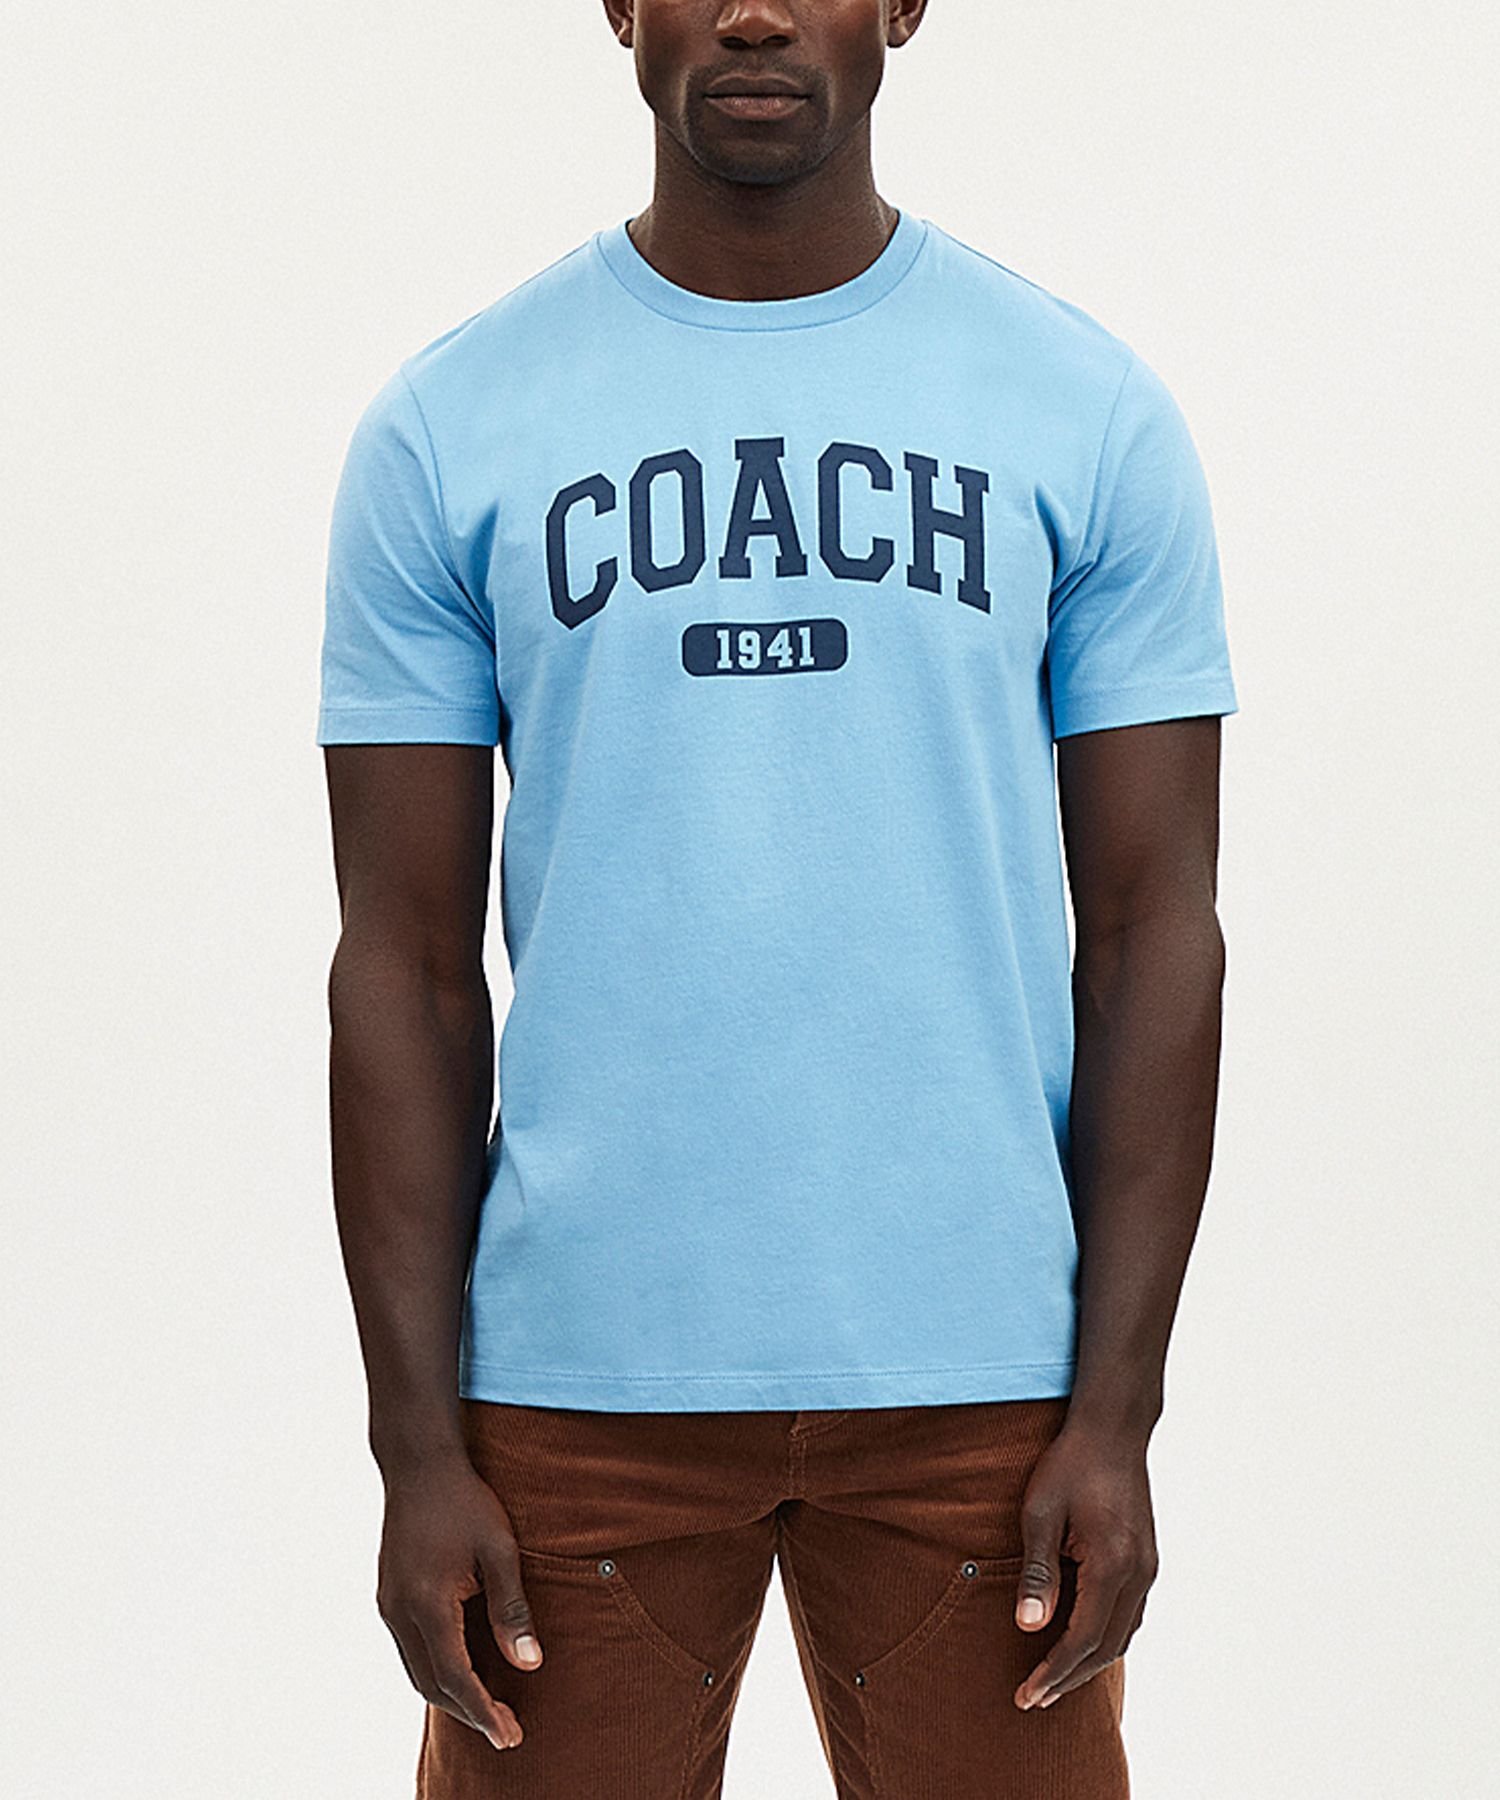 【SALE／62%OFF】COACH OUTLET ヴァーシティ Tシャツ コーチ　アウトレット トップス カットソー・Tシャツ ブルー【送料無料】